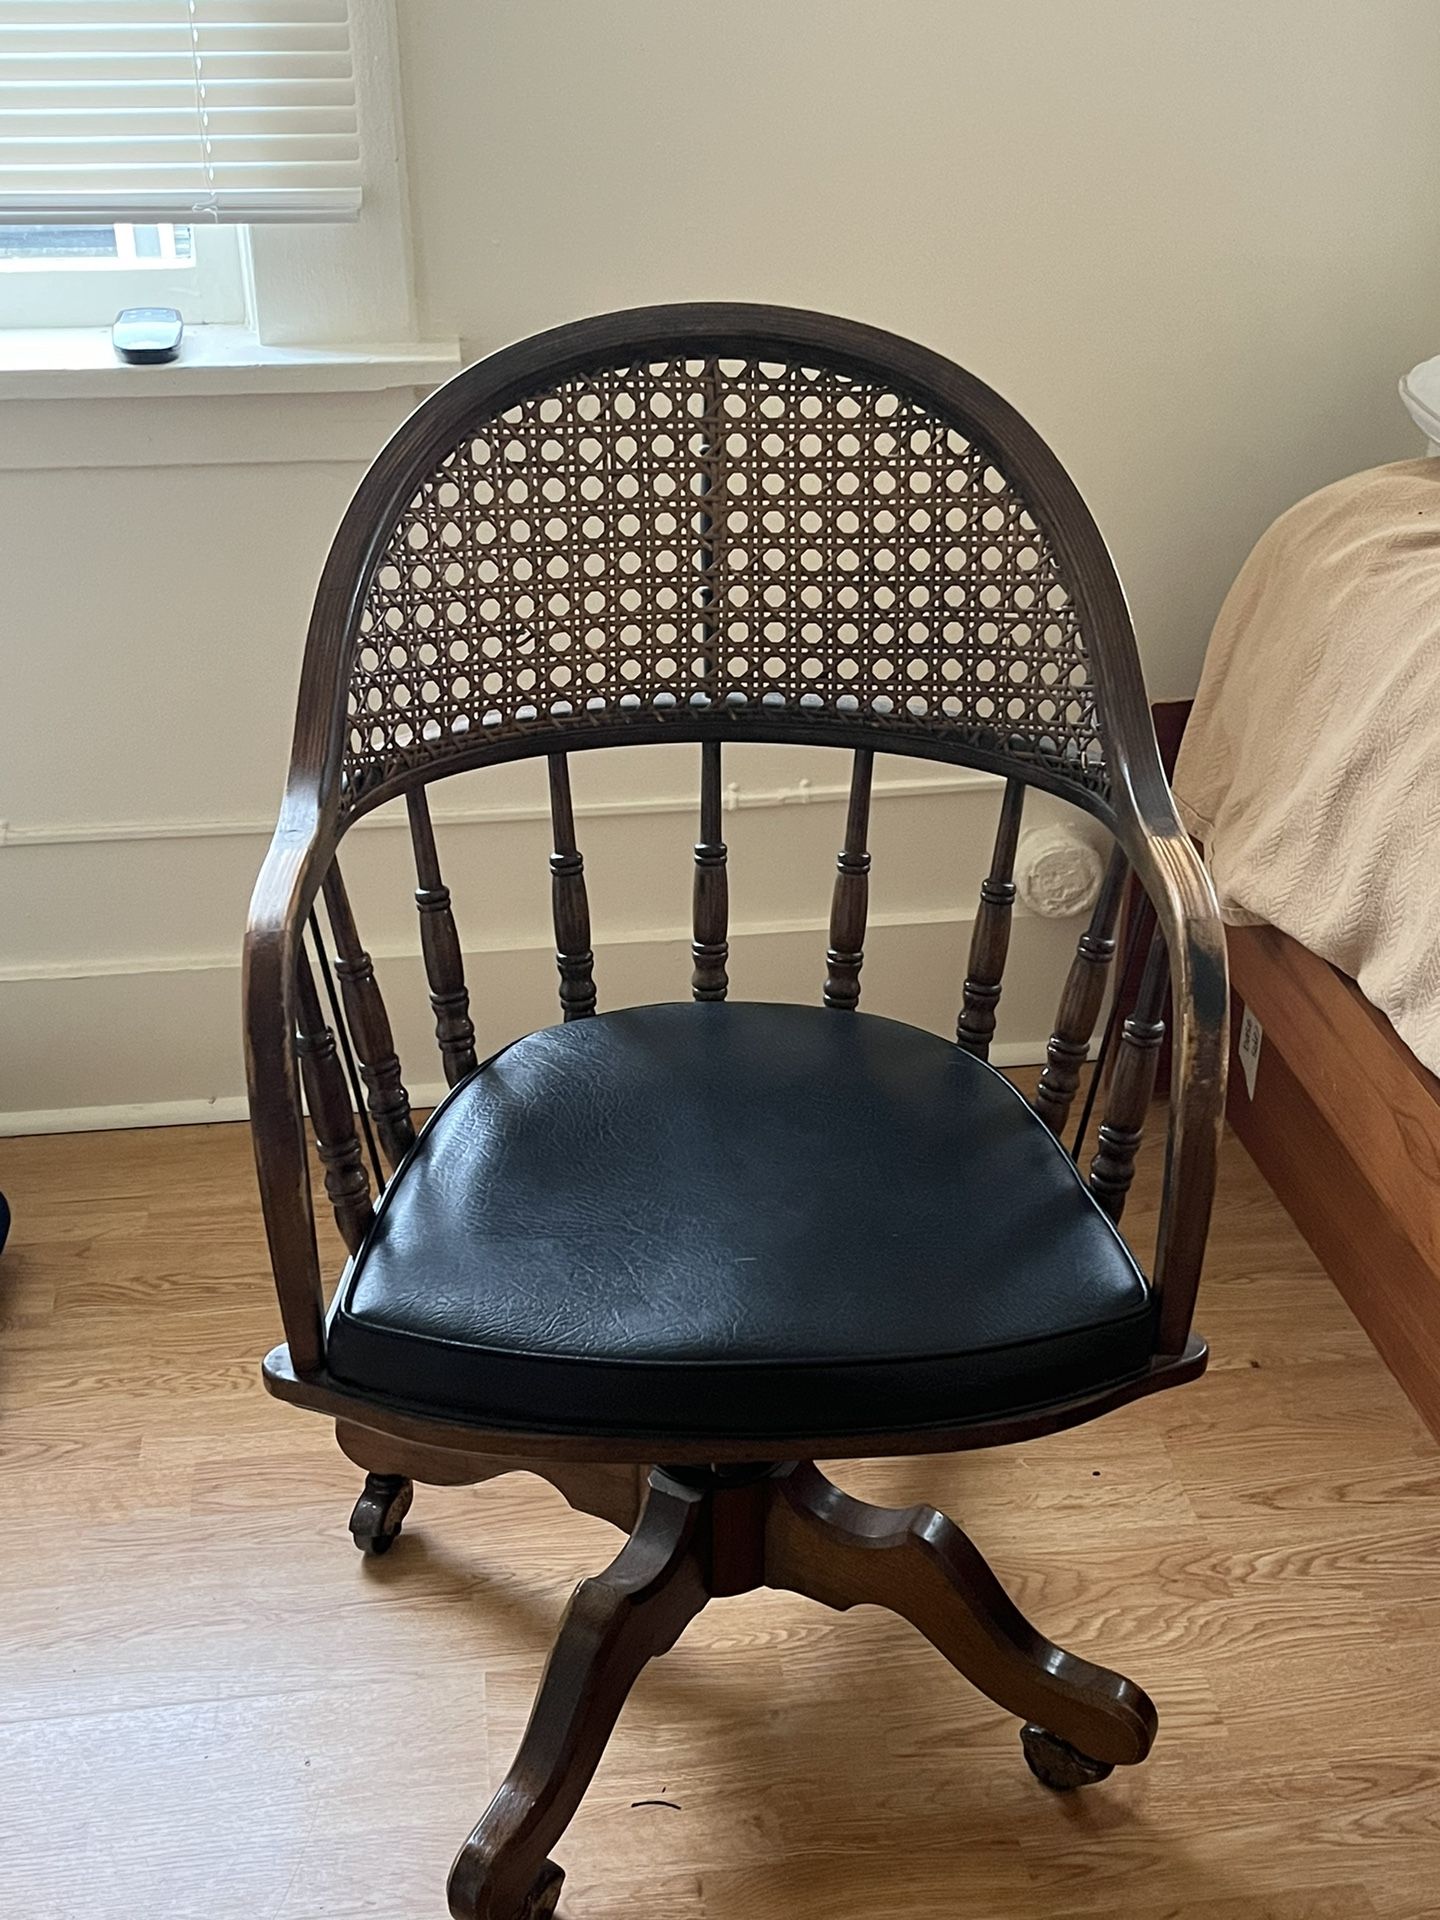 Solid Wood Chair